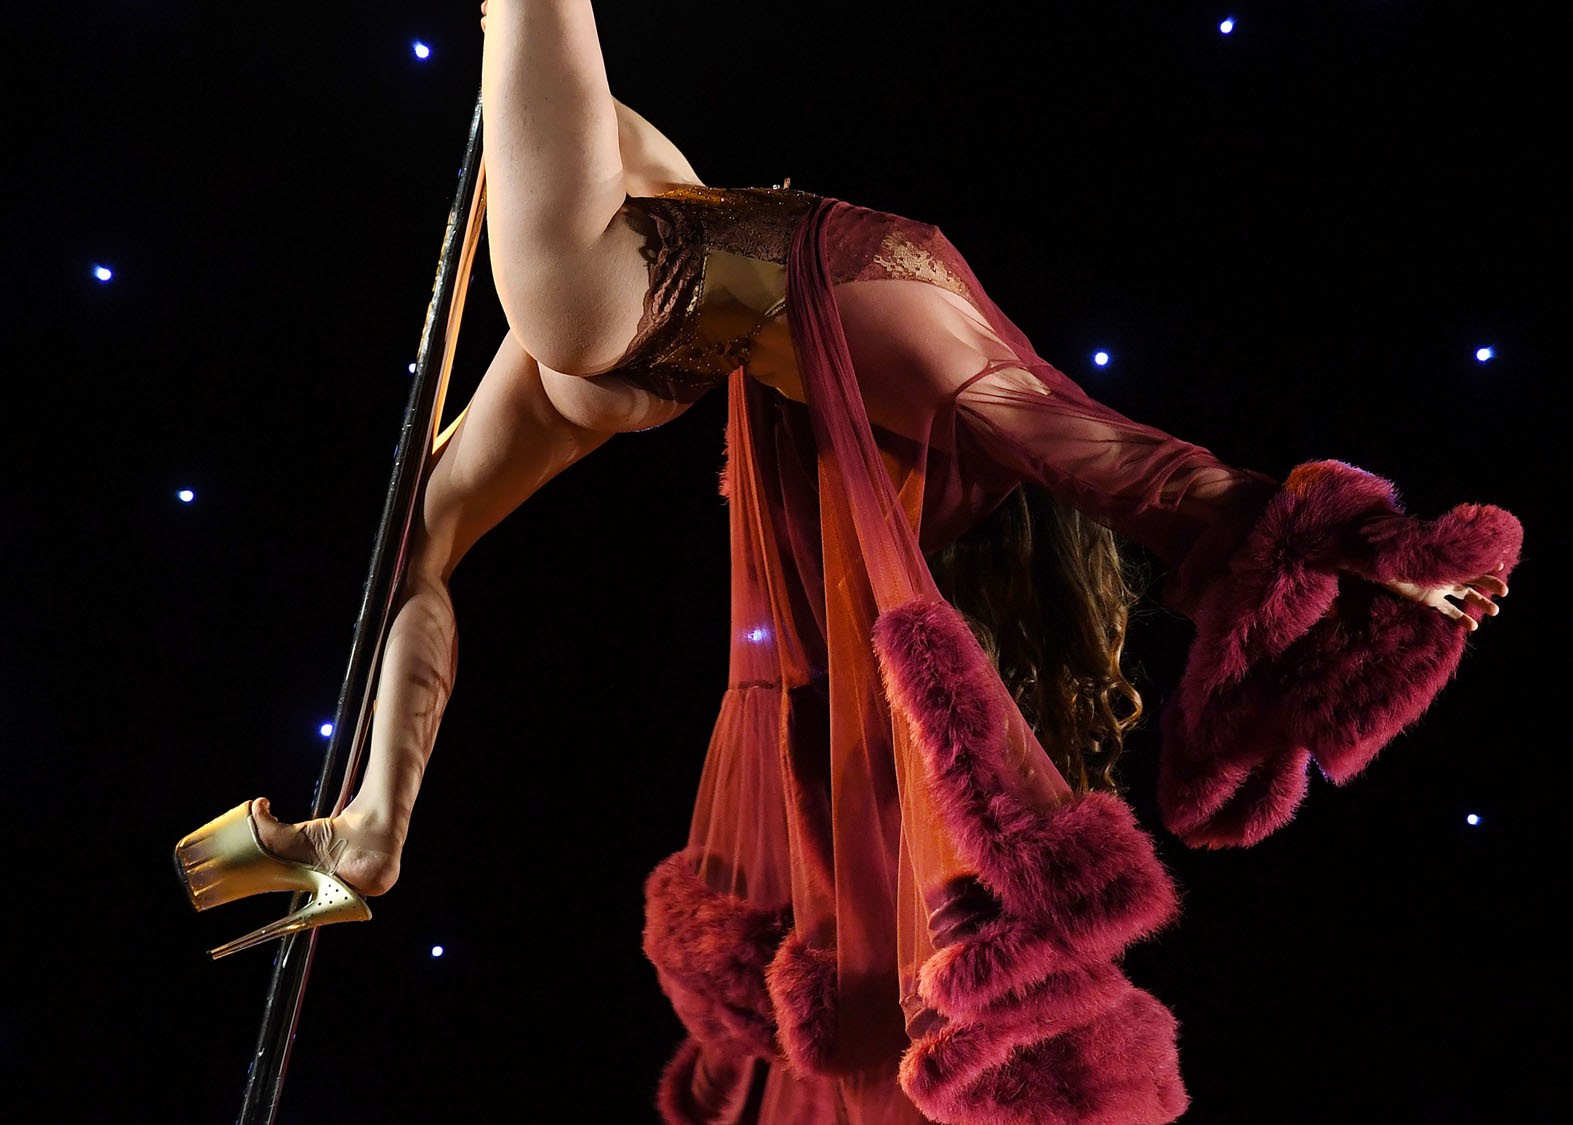 Combining dance and acrobatics, originally began as entertainment in strip clubs, pole dancing soon became mainstream as a form of exercise and expression